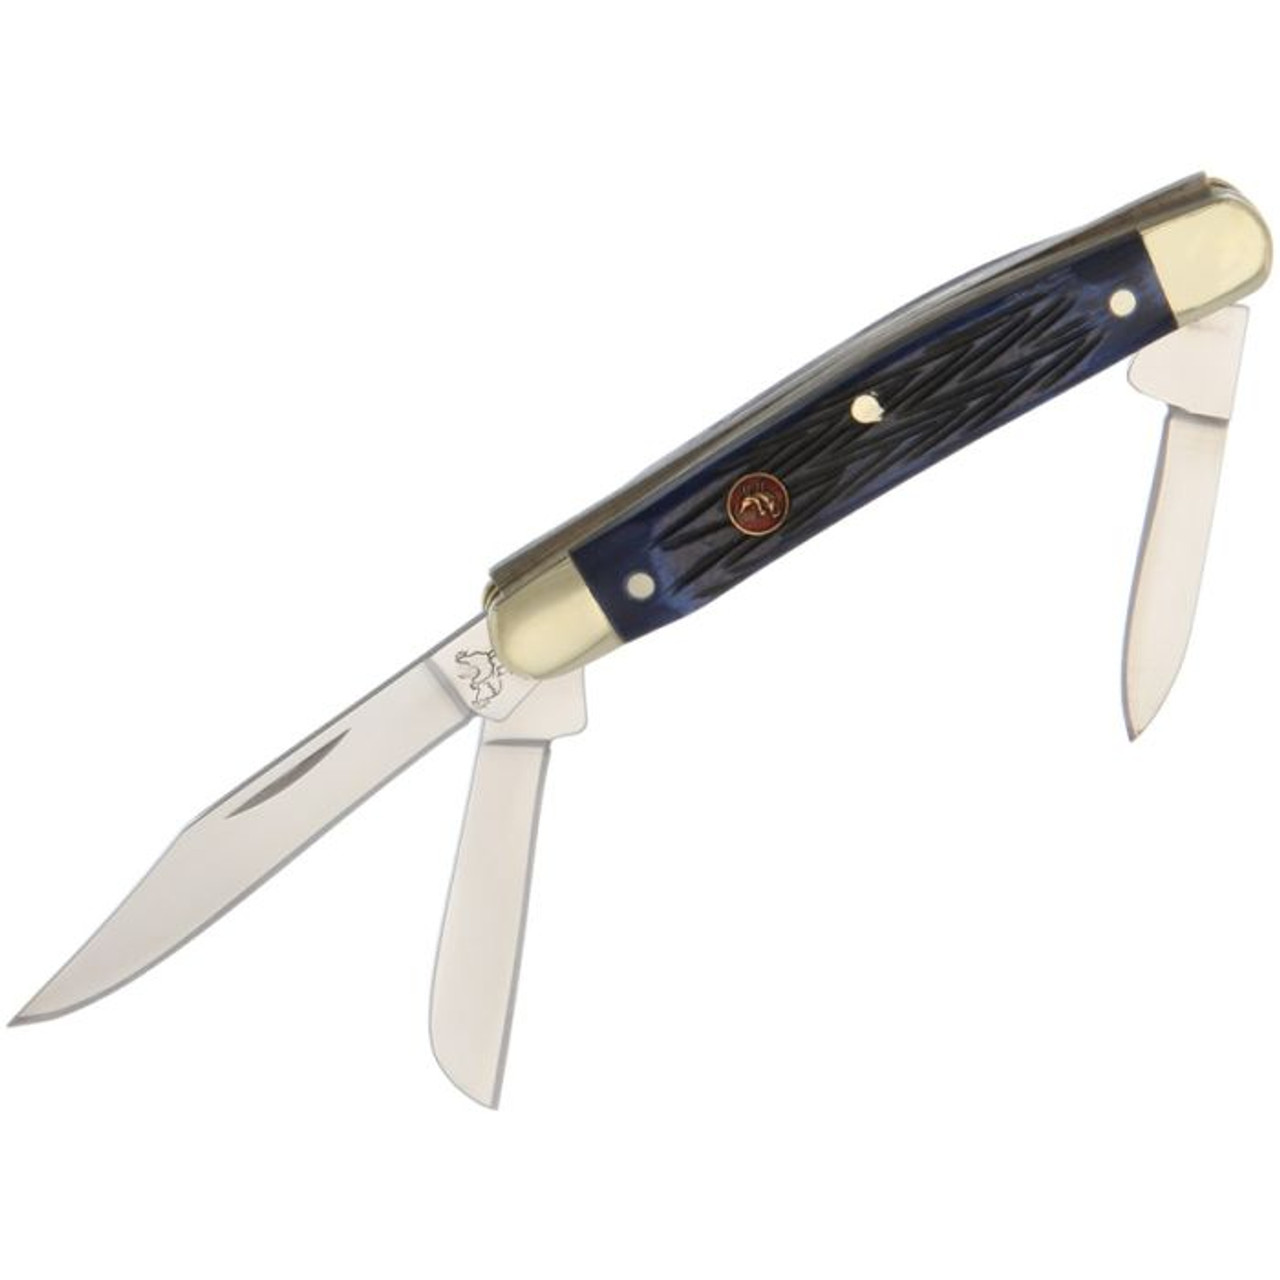 Hen & Rooster Small Stockman (HR303BLPB) German Stainless Steel Mirror Polished Clip, Pen, and Sheepsfoot Blades, Blue Pick Bone Handle